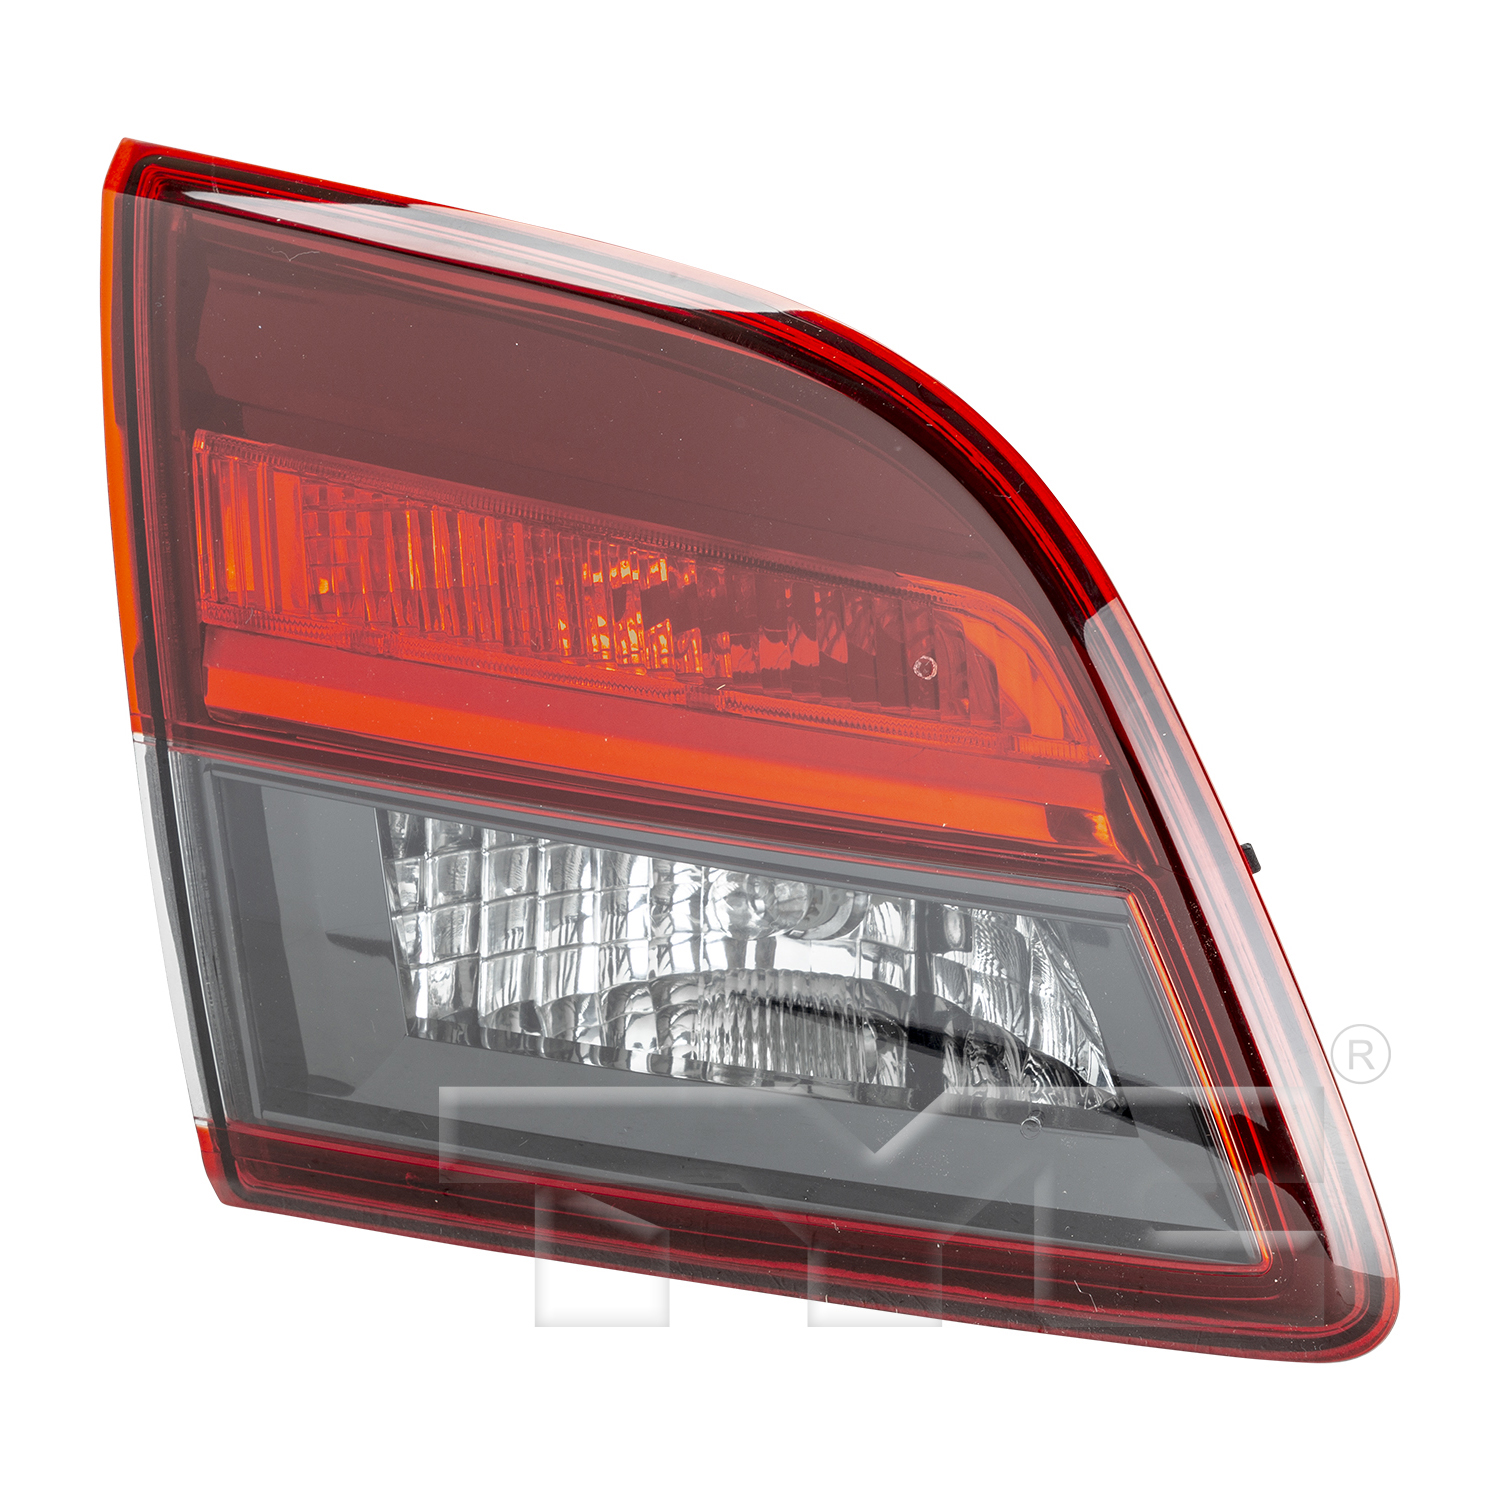 Aftermarket TAILLIGHTS for MAZDA - CX-9, CX-9,13-15,LT Taillamp assy inner